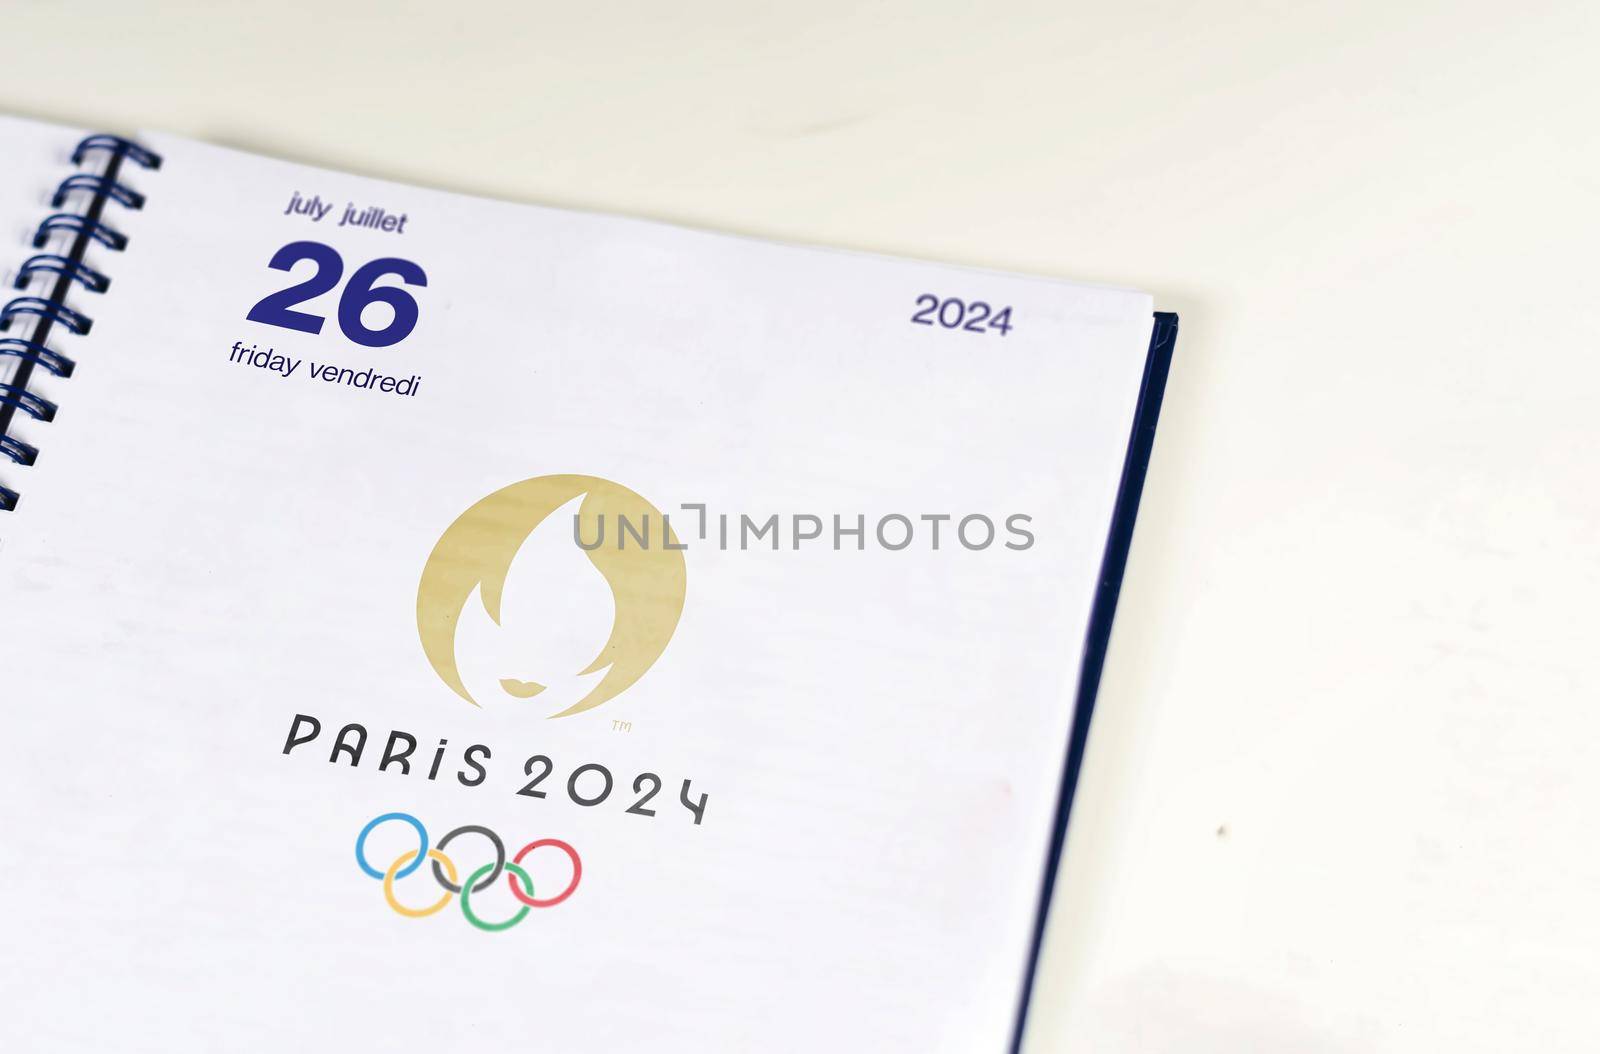 Paris, France, August 2021: An open agenda on the page of July 26, 2024, opening day of the Paris 2024 Summer Olympics by rarrarorro